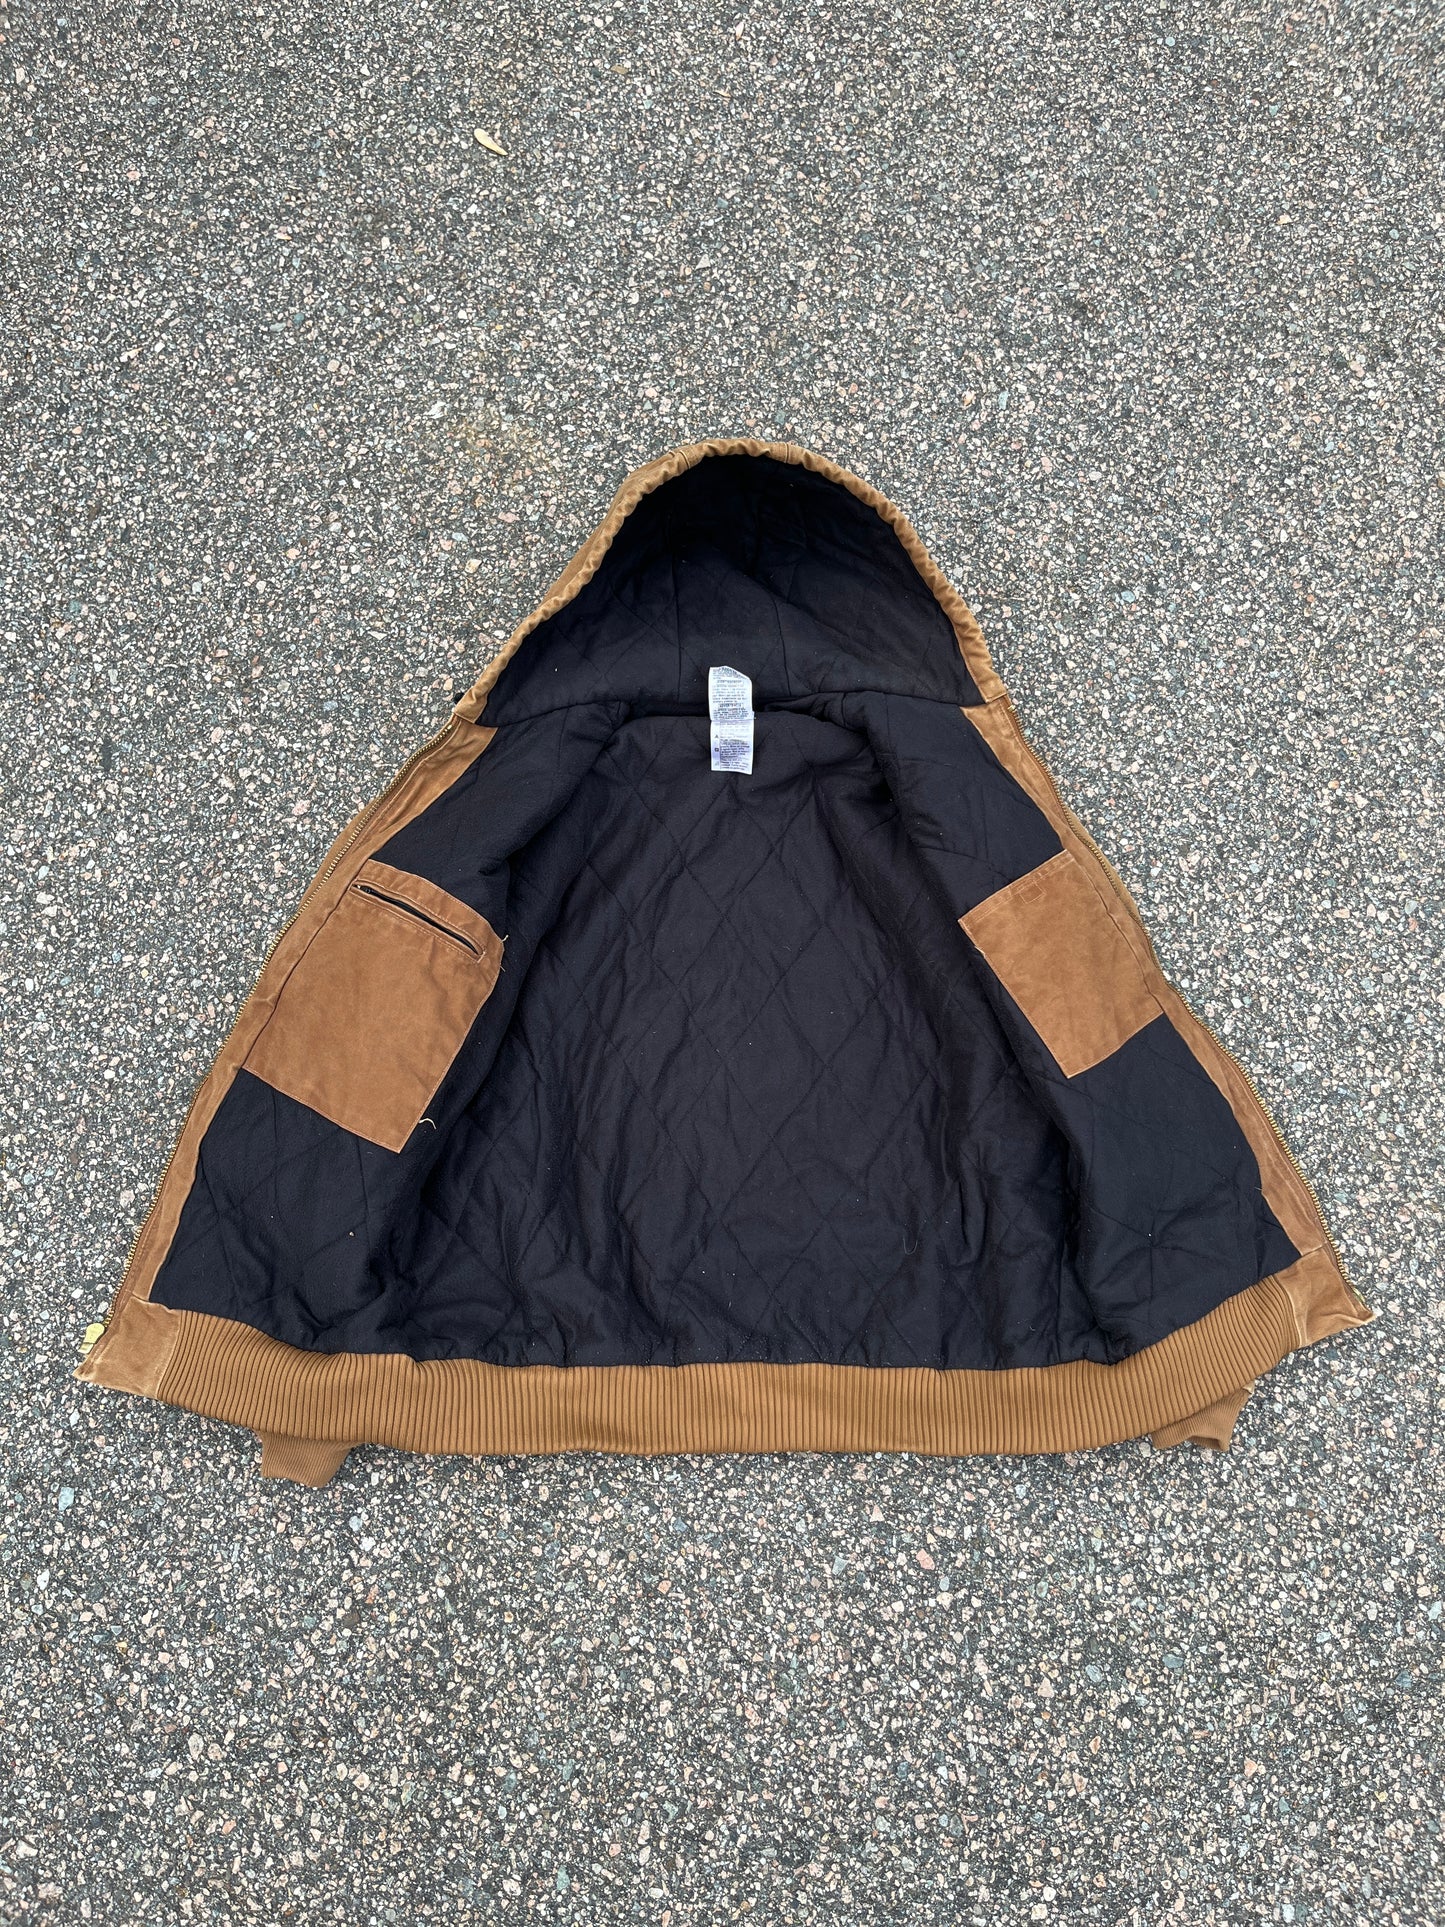 Faded Brown Carhartt Jacket - Large